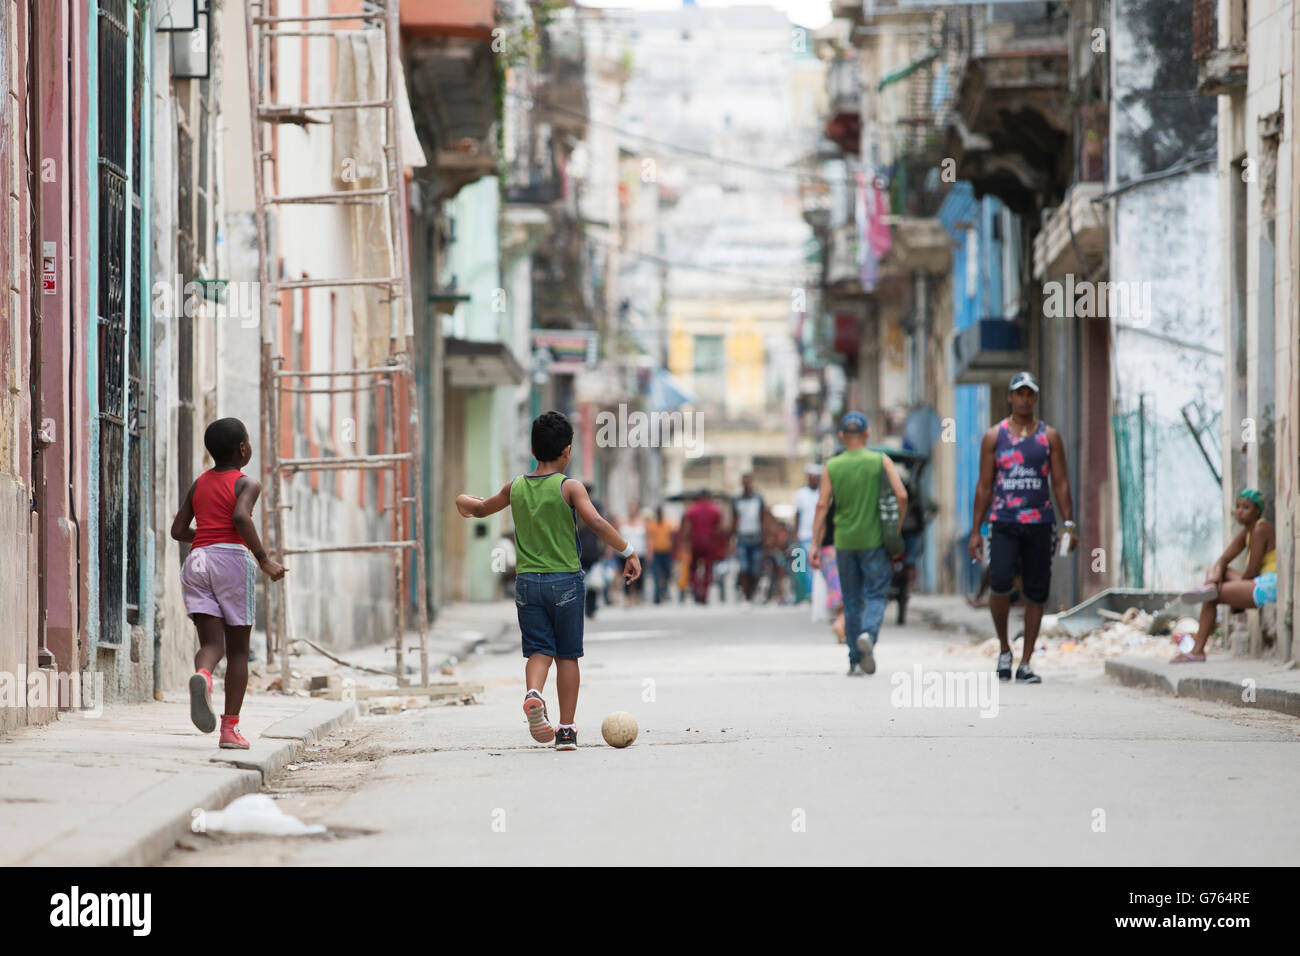 Young boys playing football in a street in Havana, Cuba Stock Photo